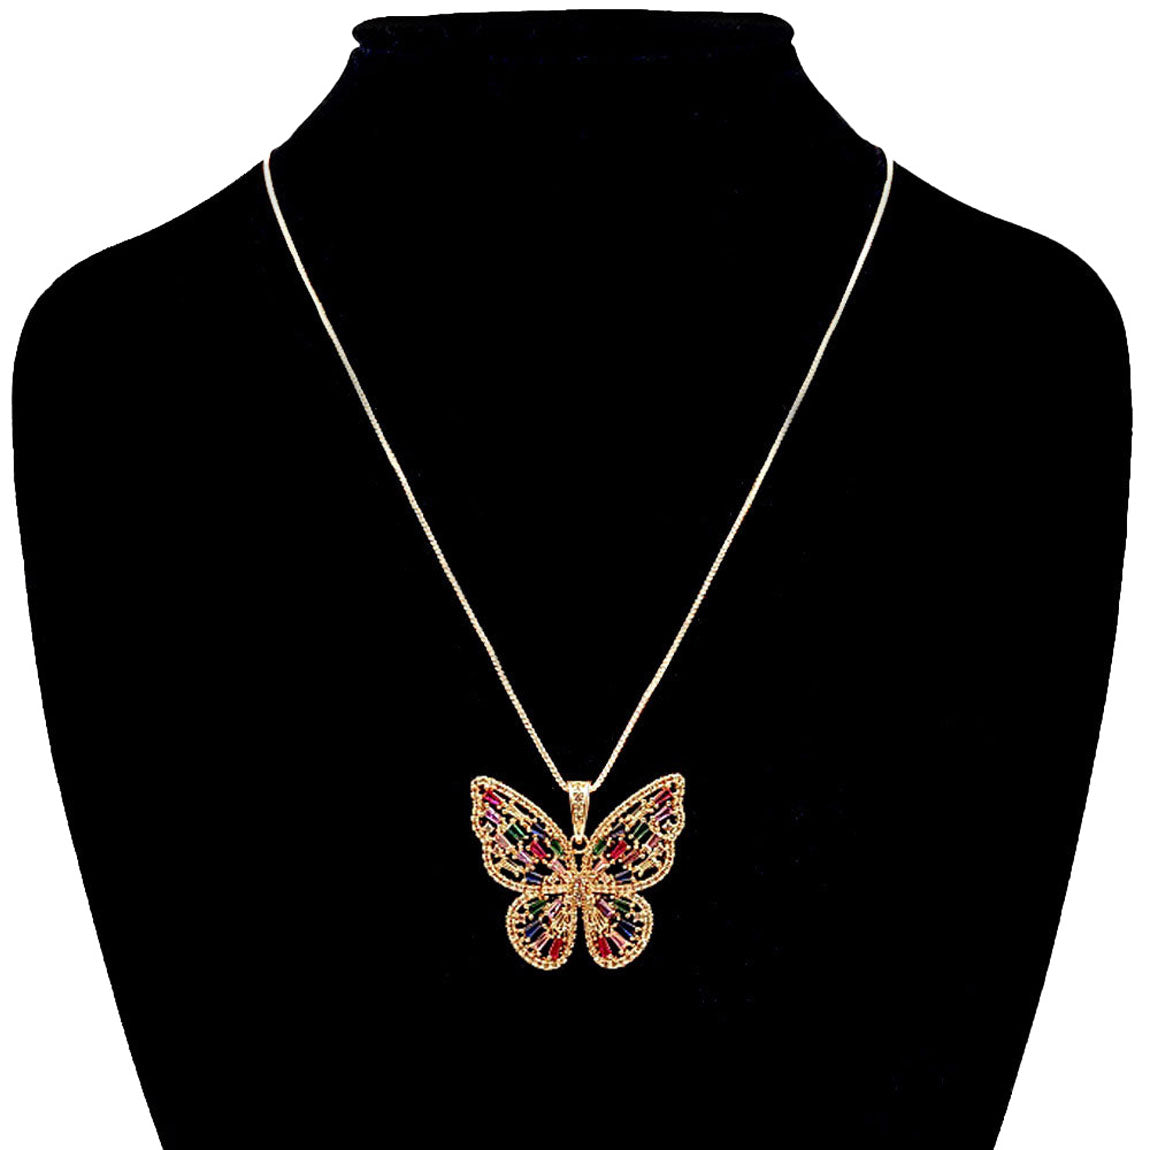 Gold Multi CZ Butterfly Pendant Necklace, butterflies bring a message of positivity and hope, transformation & new beginnings, versatile enough for wearing straight through the week, delicate for all-day wear, coordinate with any ensemble from business casual to everyday wear, Get ready with these Pendant Necklace, put on a pop of color to complete your ensemble. Perfect for adding just the right amount of shimmer & shine and a touch of class to special events.